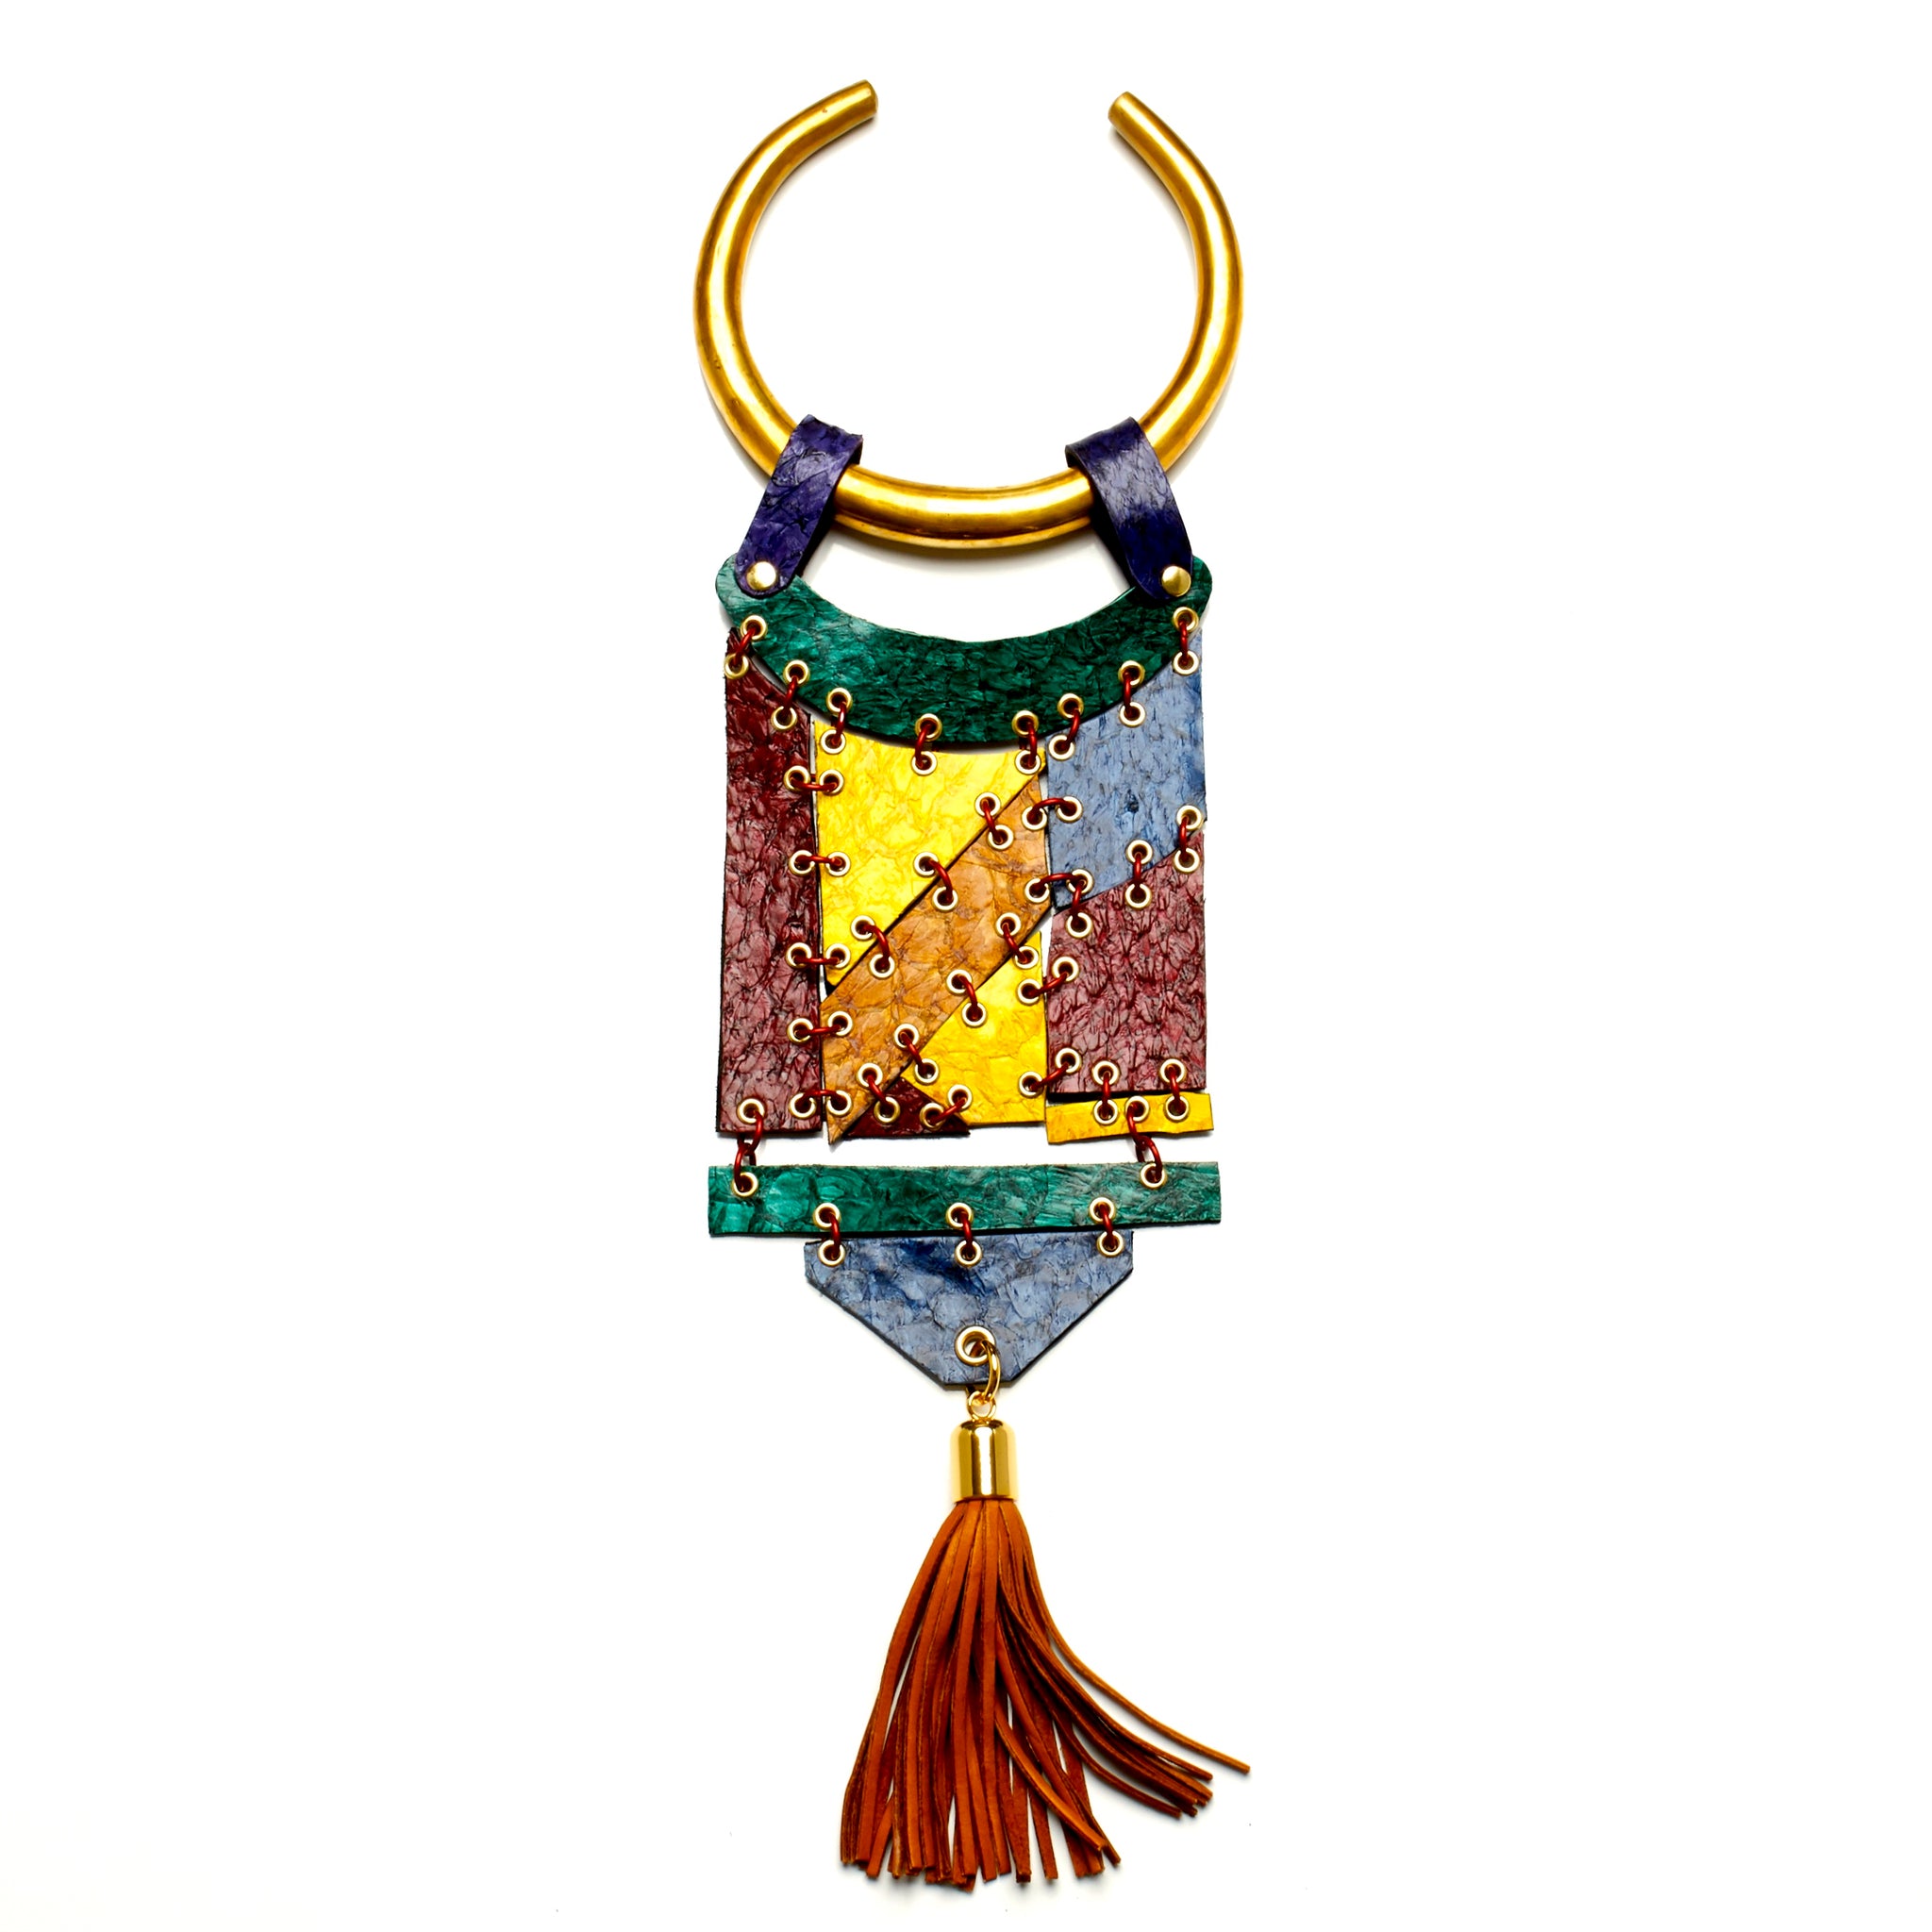 THICK ROUND SOLID BRASS TORQUE NECKLACE WITH HINGED PANELS MADE OF FISH LEATHER WITH DEERSKIN TASSEL BY NYET JEWELRY.